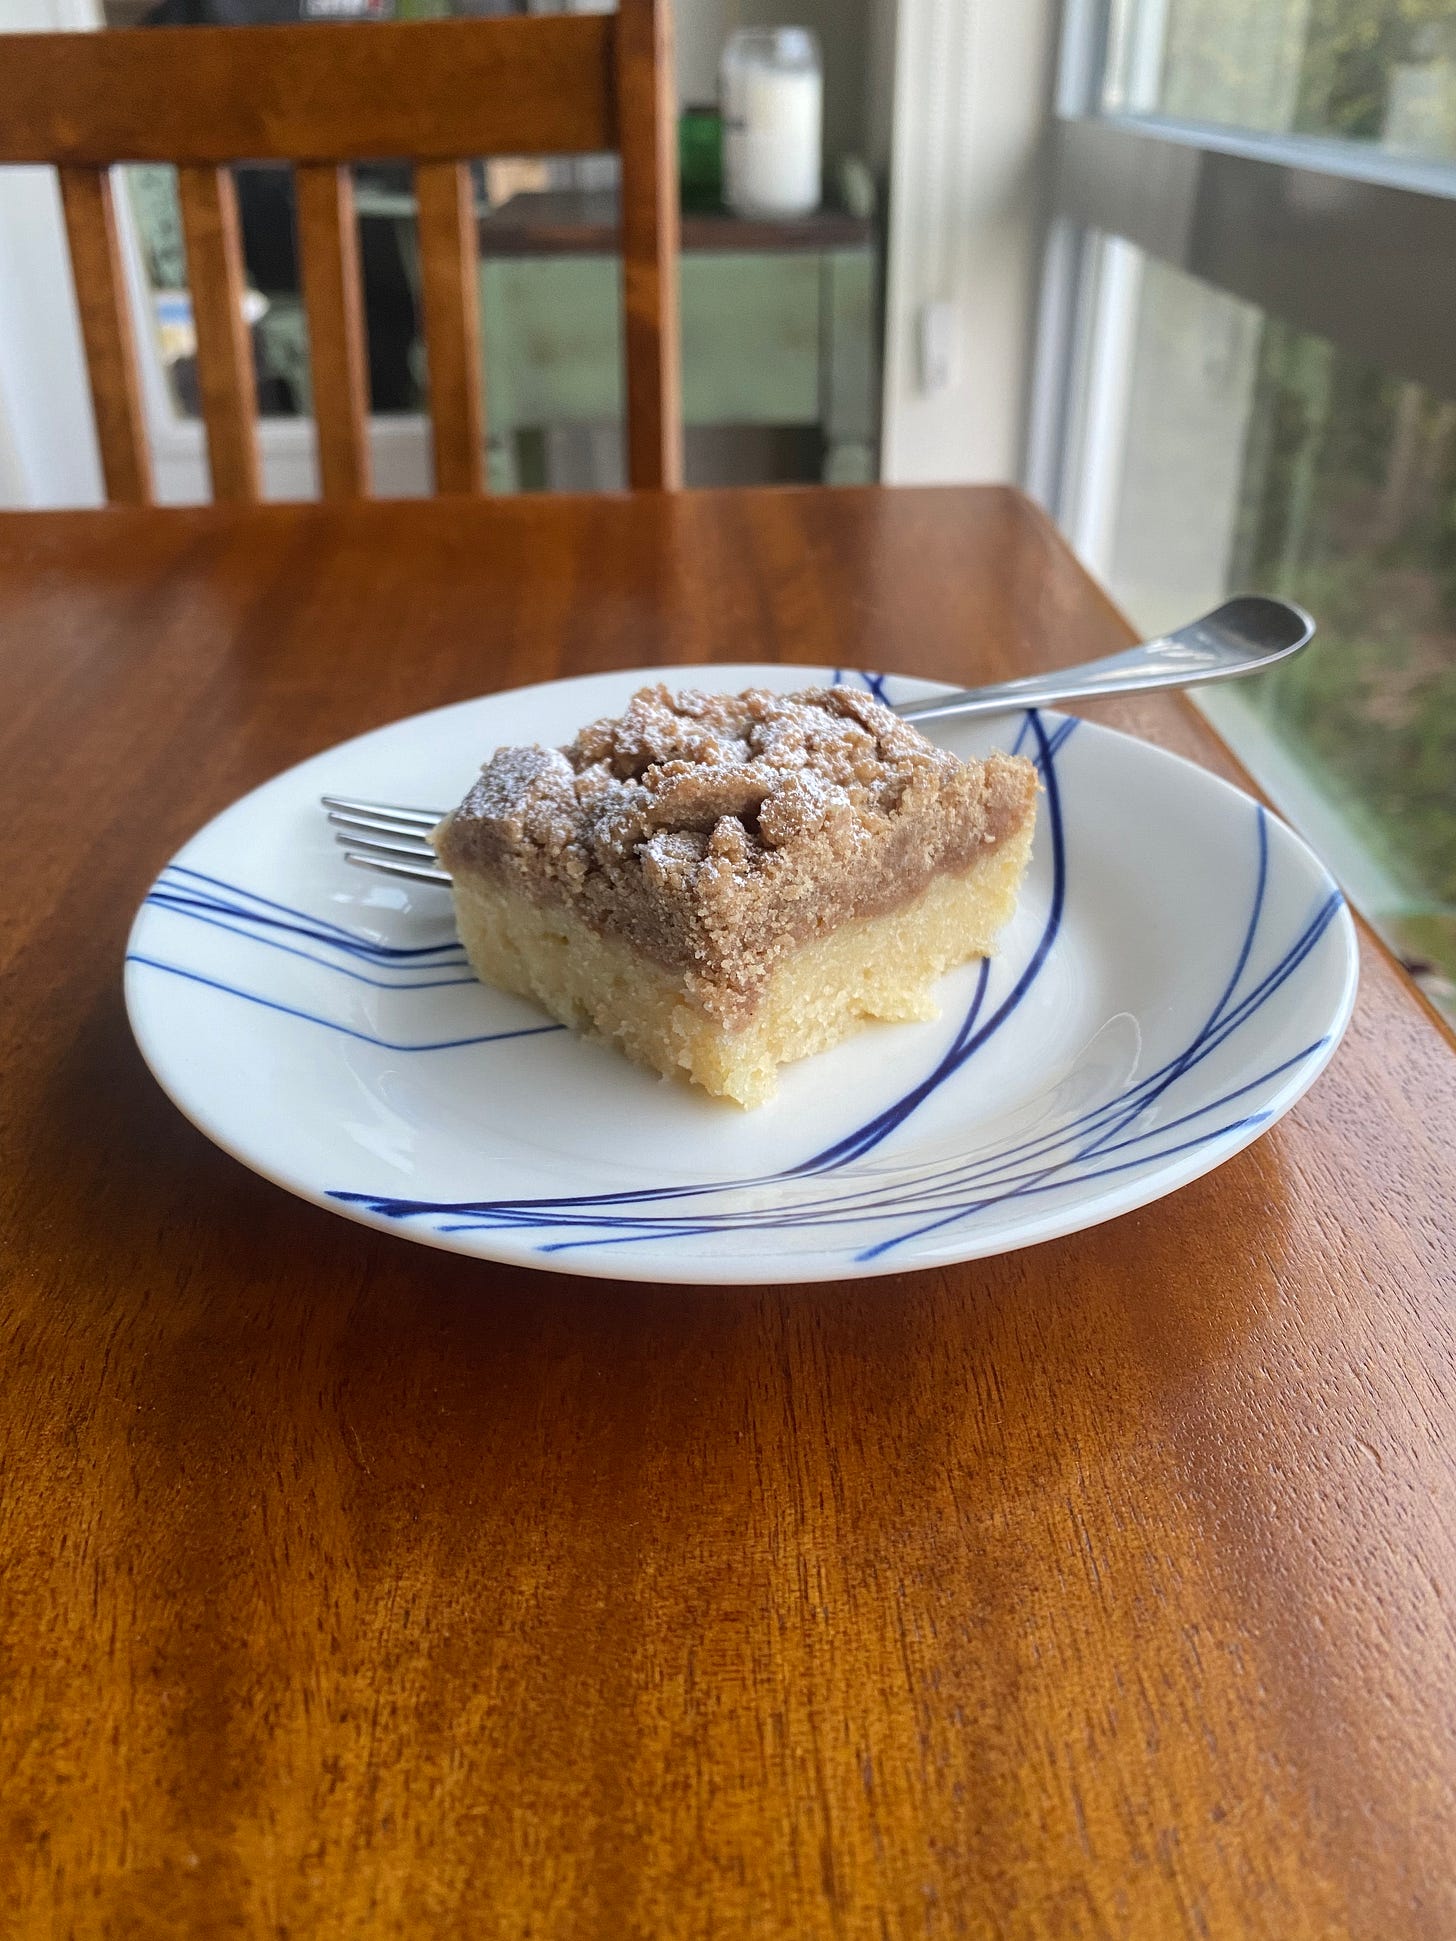 A slice of the crumb cake described above, on a blue and white plate with a fork resting at the back. The cake is equal parts yellow vanilla cake and light brown crumb topping, dusted with powdered sugar.